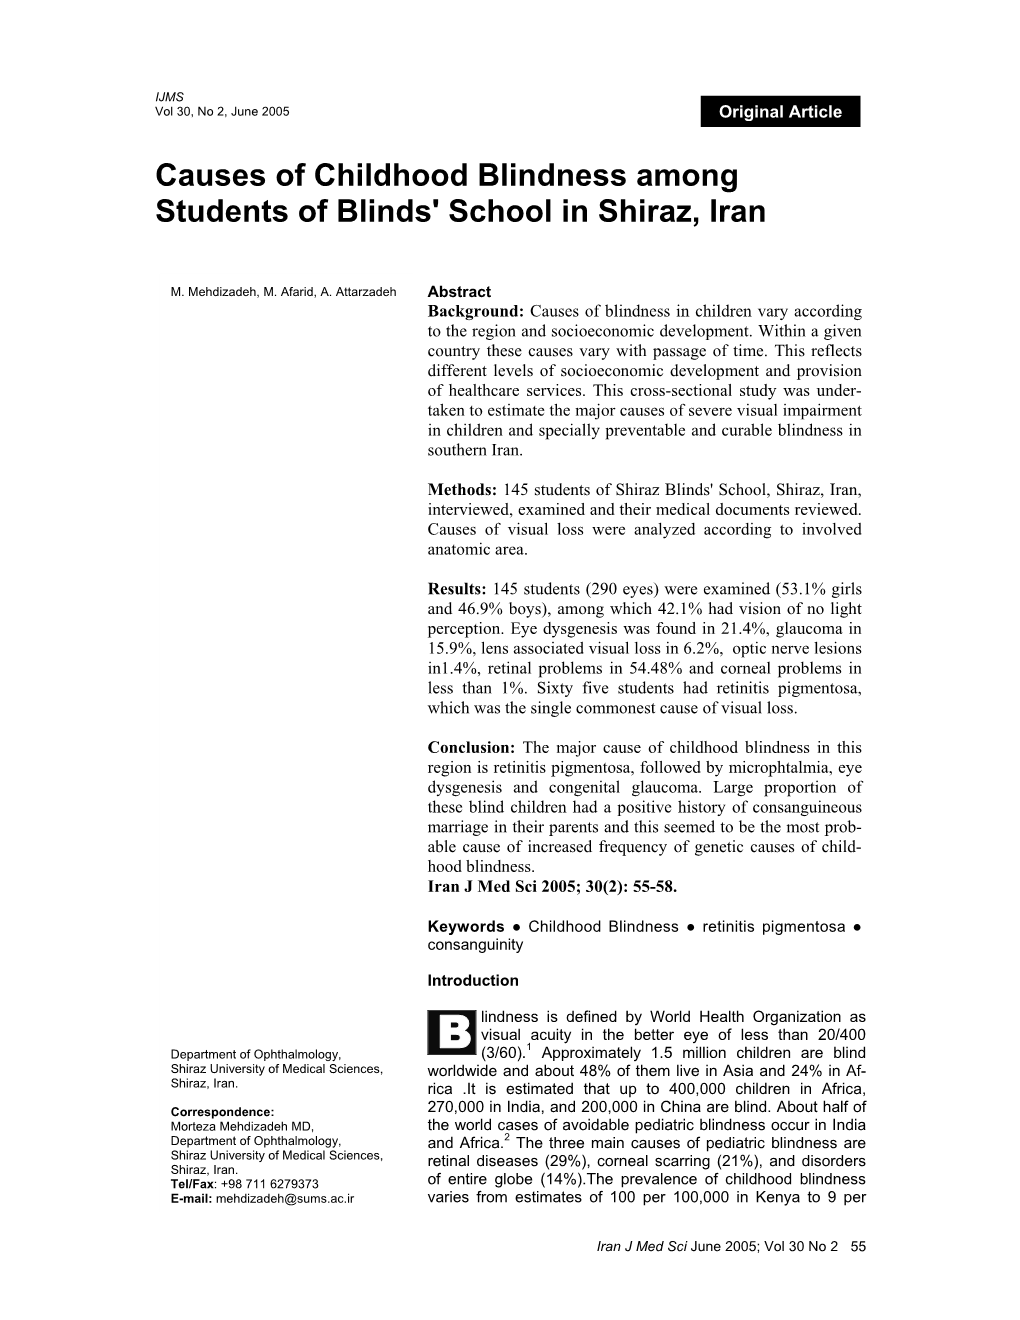 Causes of Childhood Blindness Among Students of Blinds' School in Shiraz, Iran